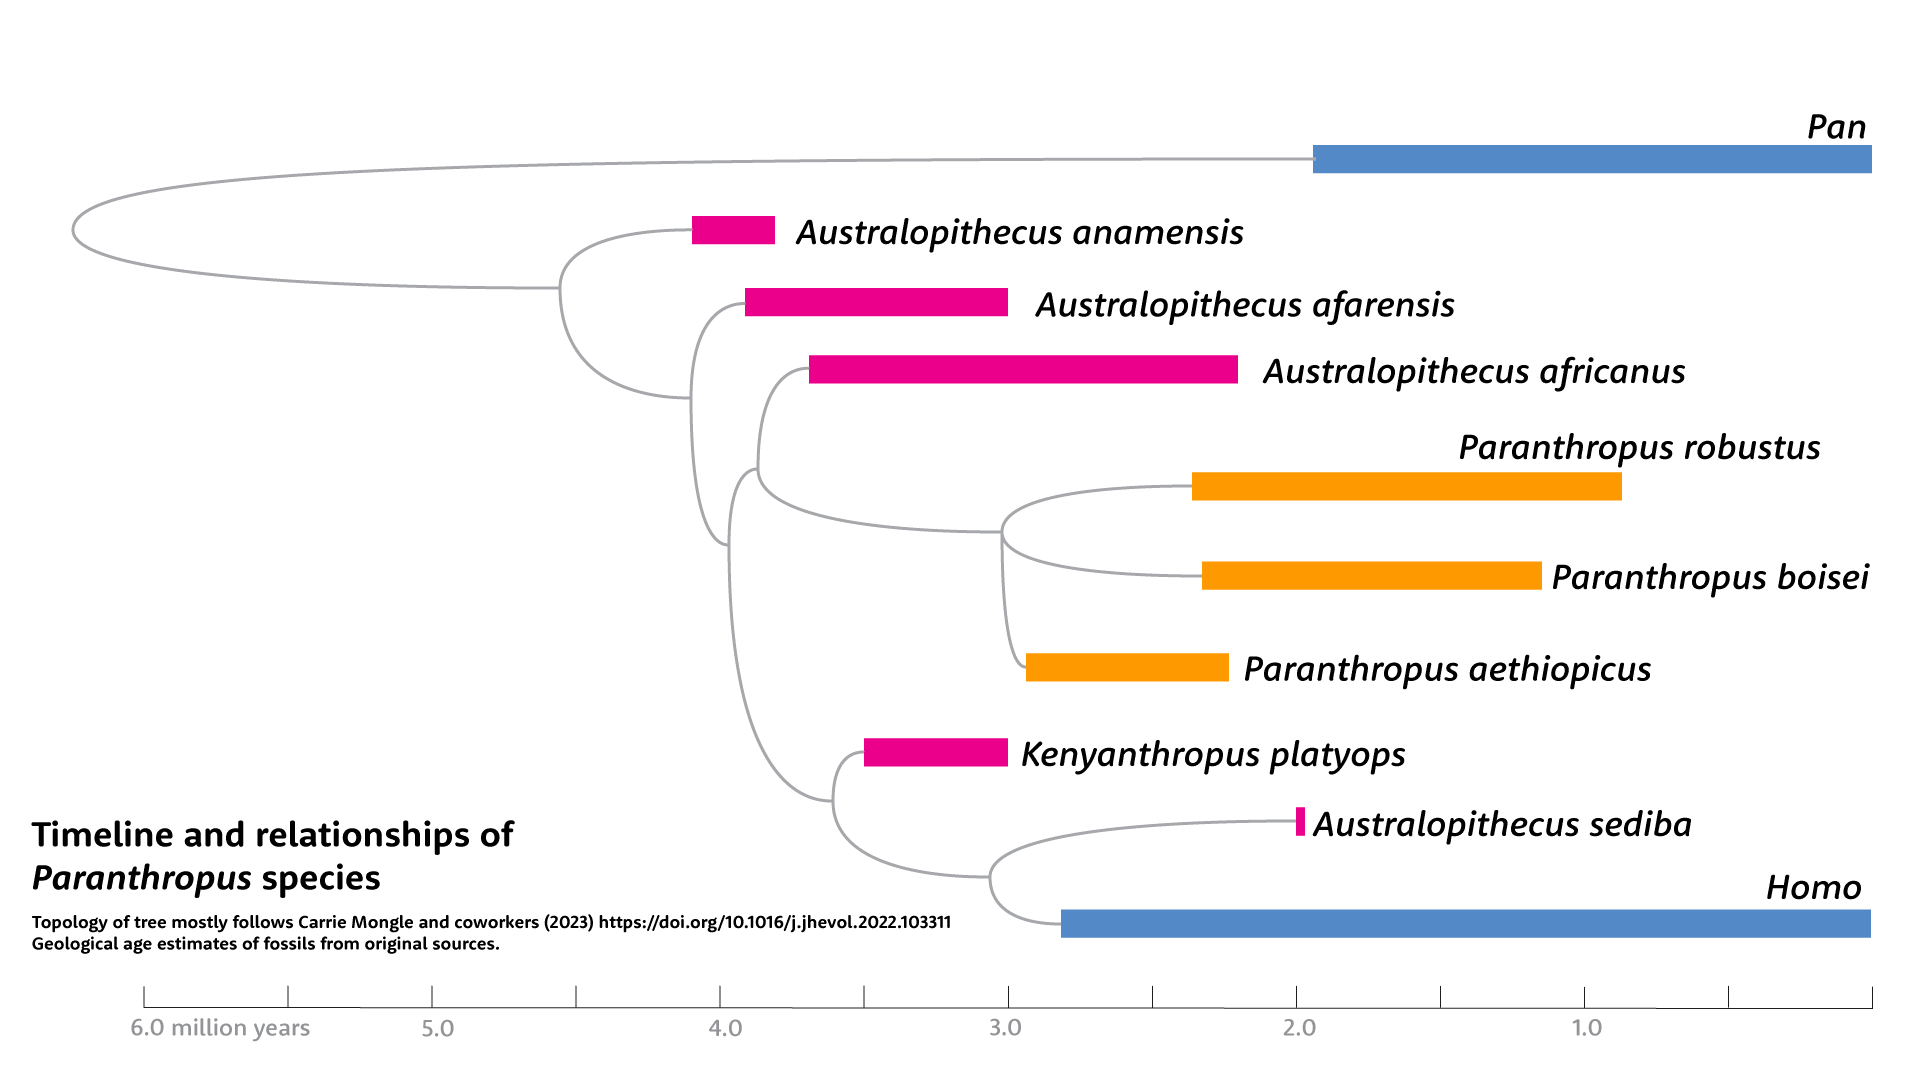 Timeline and relationships of Paranthropus species. Paranthropus robustus, boisei, and aethiopicus are shown here as a branch most closely related to Australopithecus africanus